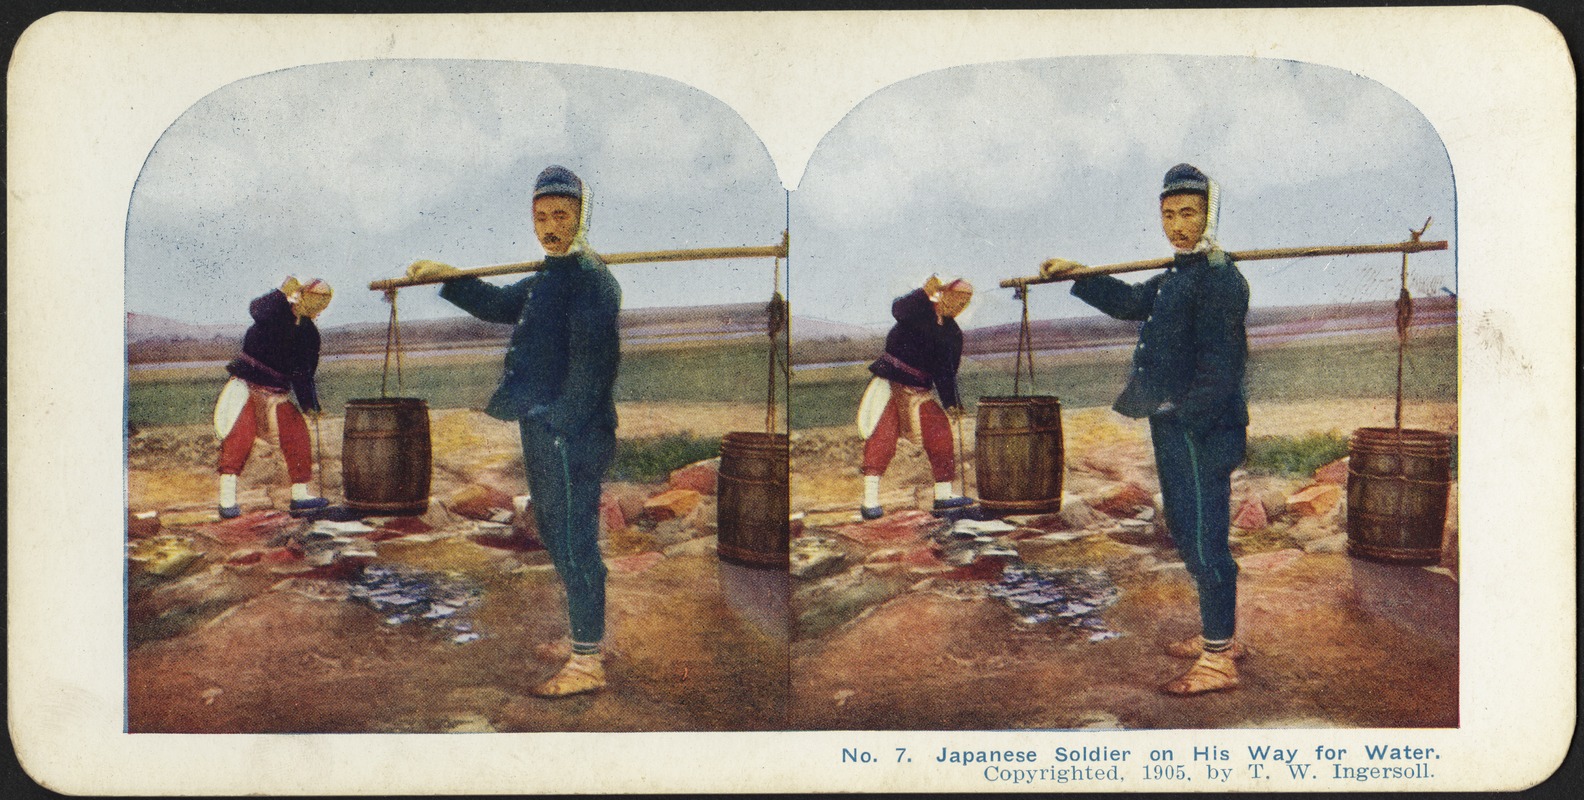 A Japanese soldier on his way to the well for water